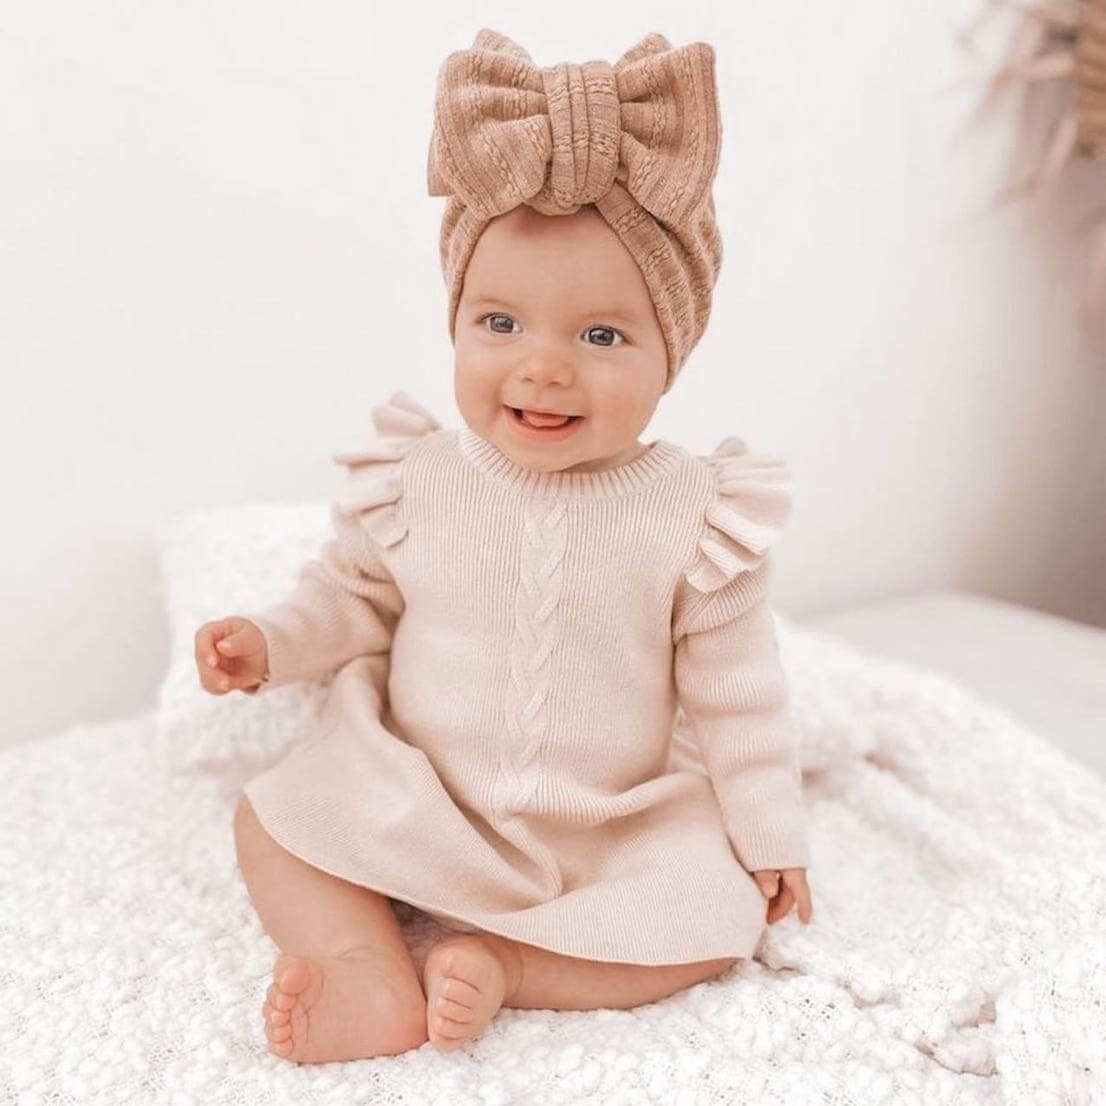 Baby Lookbook | Baby Outfit Ideas and Inspiration